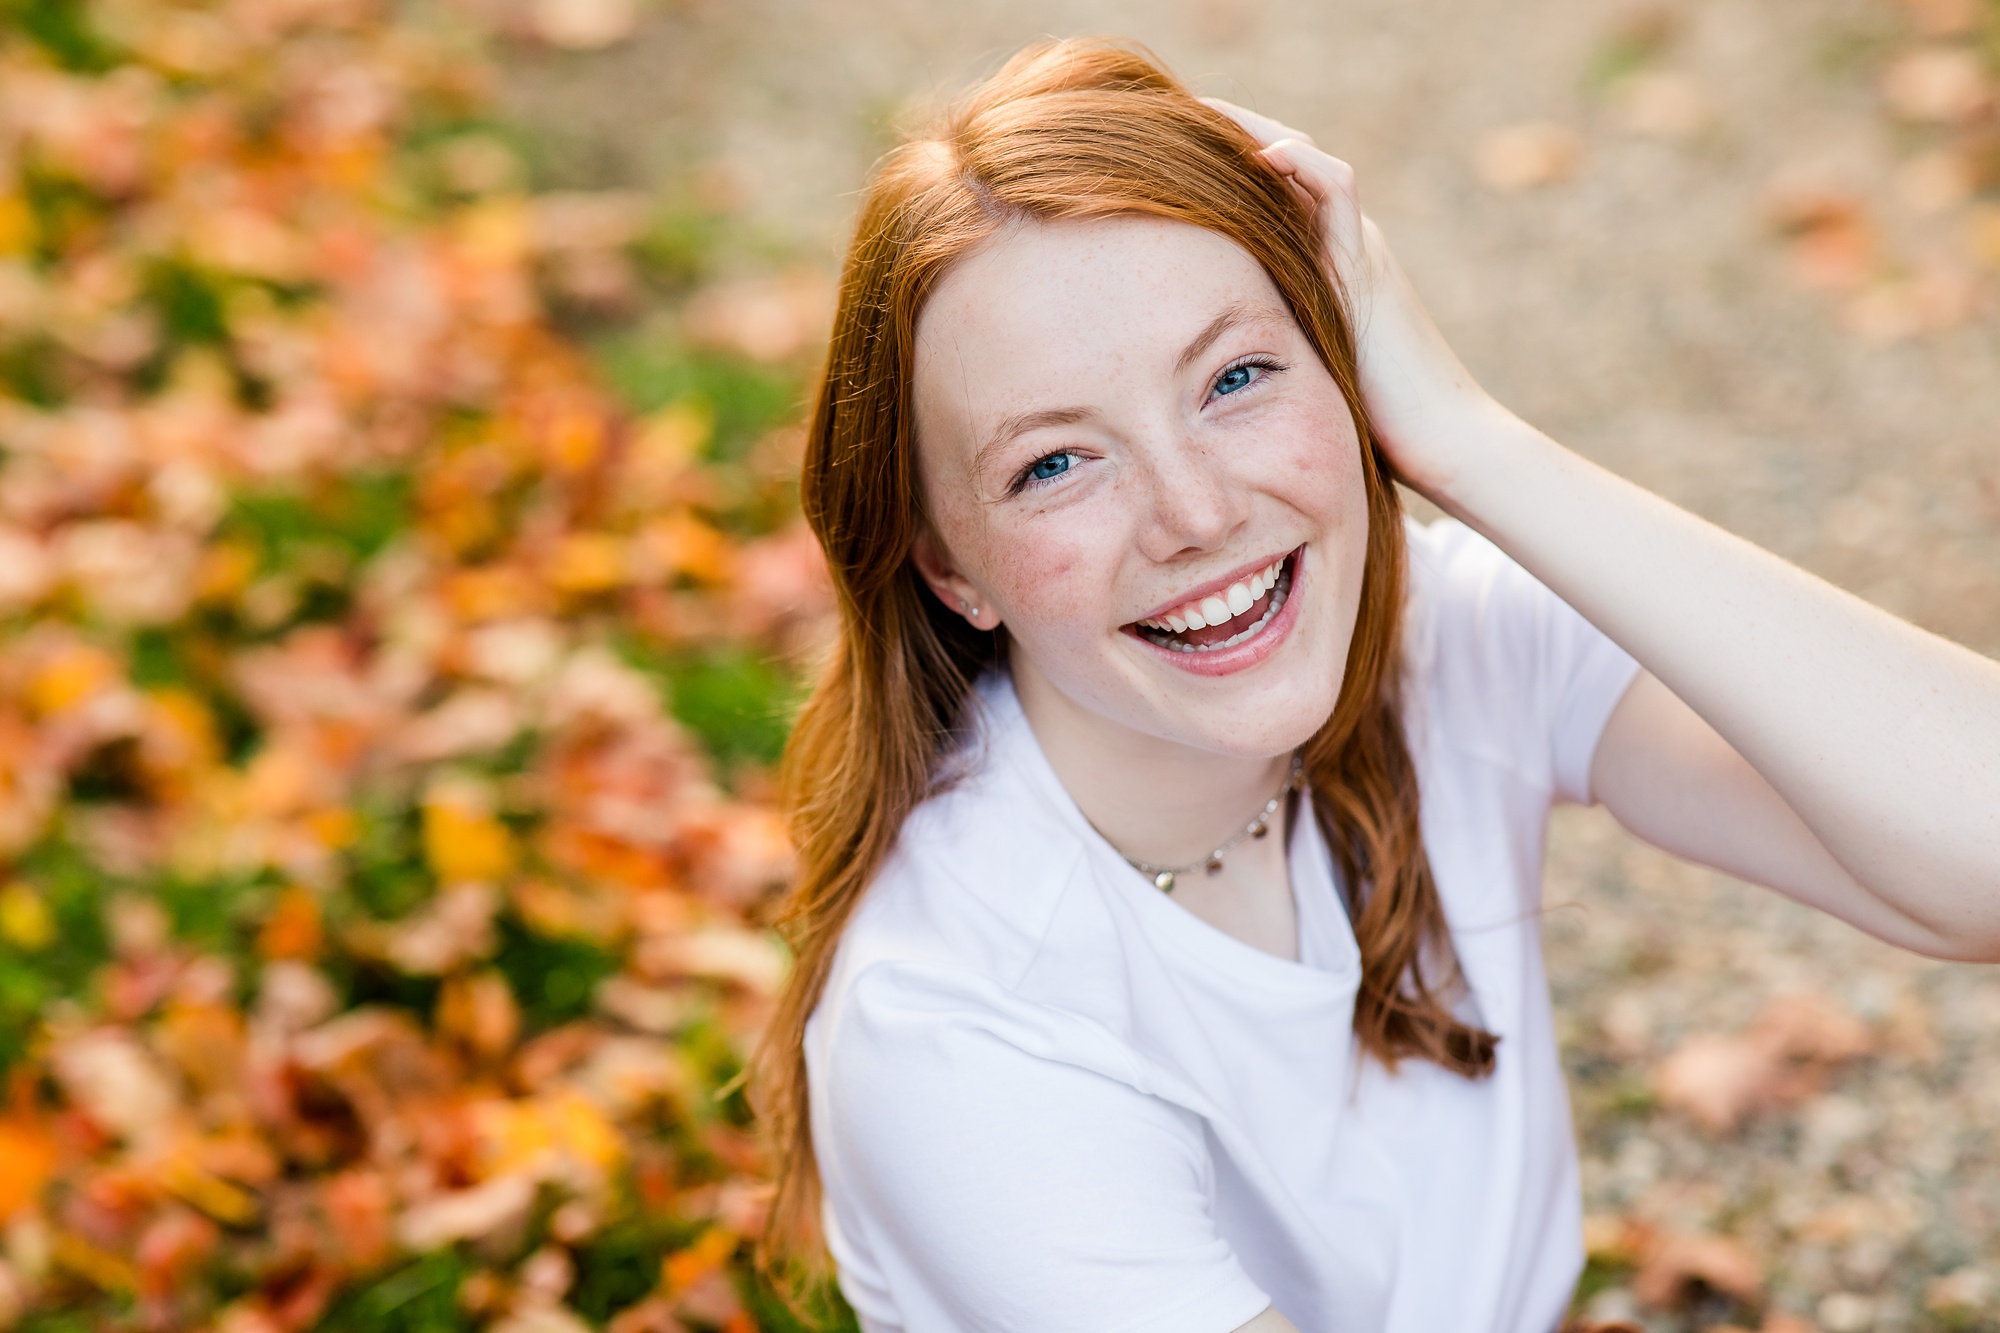 High School Senior Photography, Sitting in Fall Leaves | Amber Langerud Photography